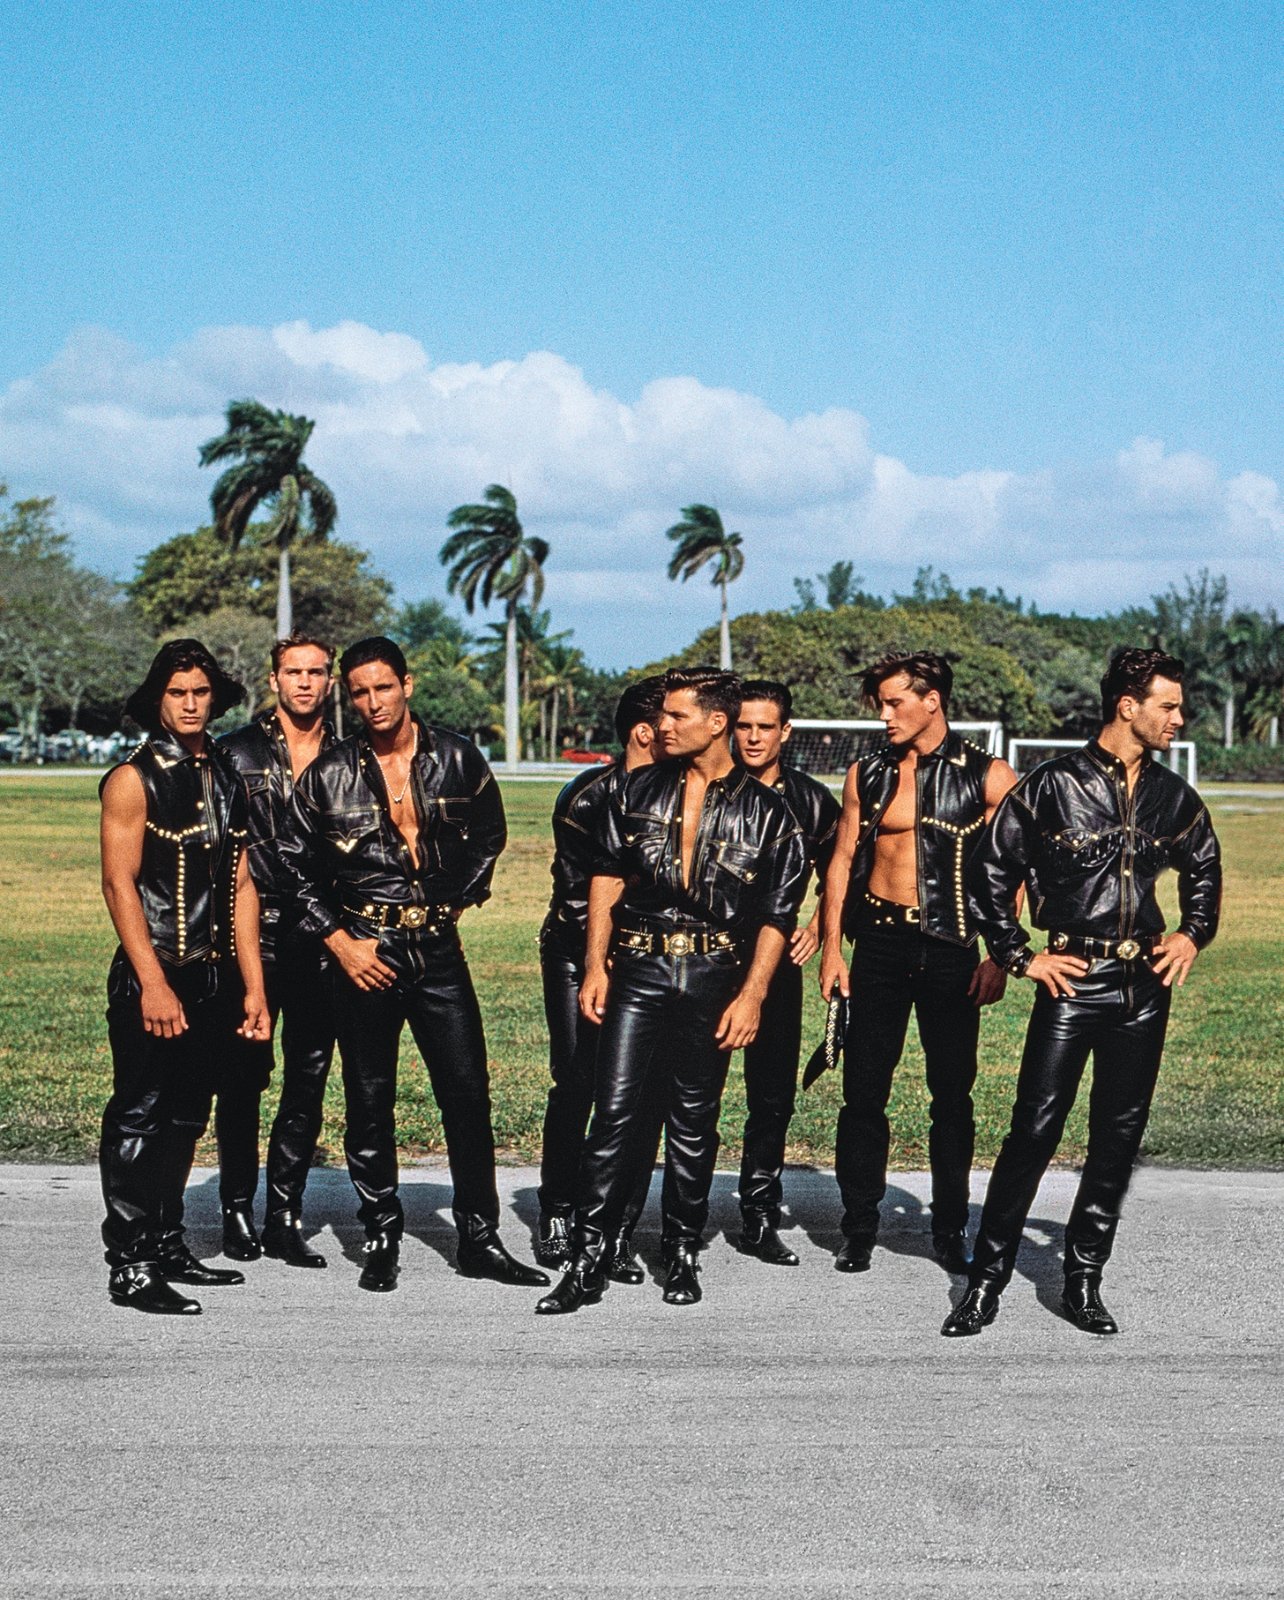 Versace male models in leather posing at Crandon Park, Key Biscayne